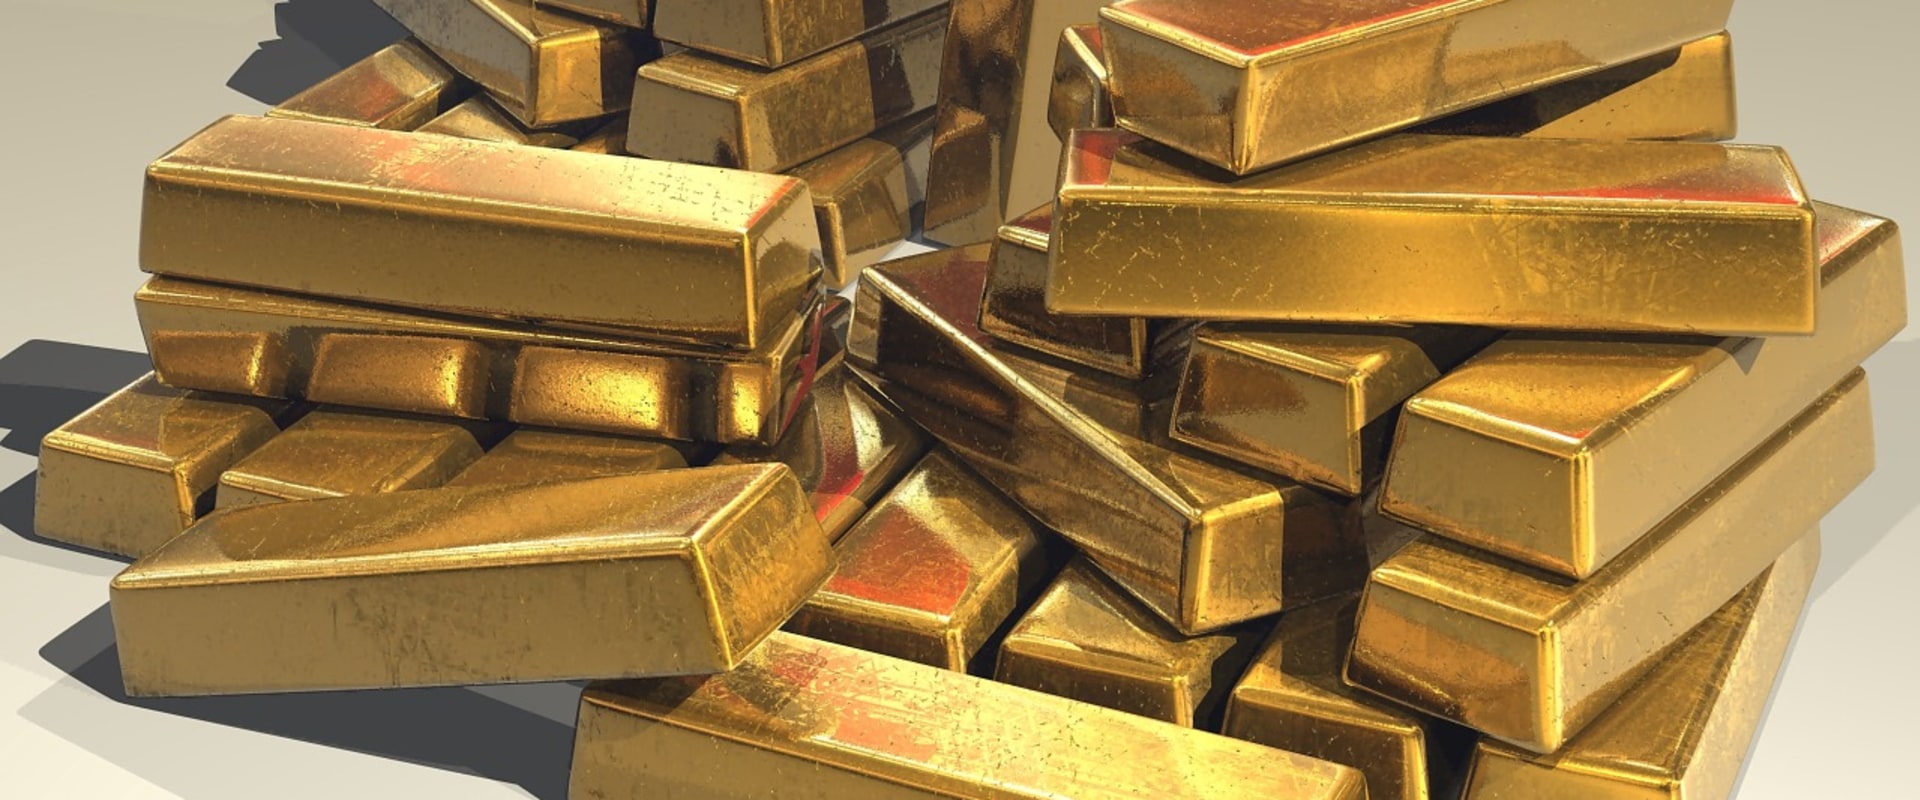 What Will the Price of Gold Be in 2030?